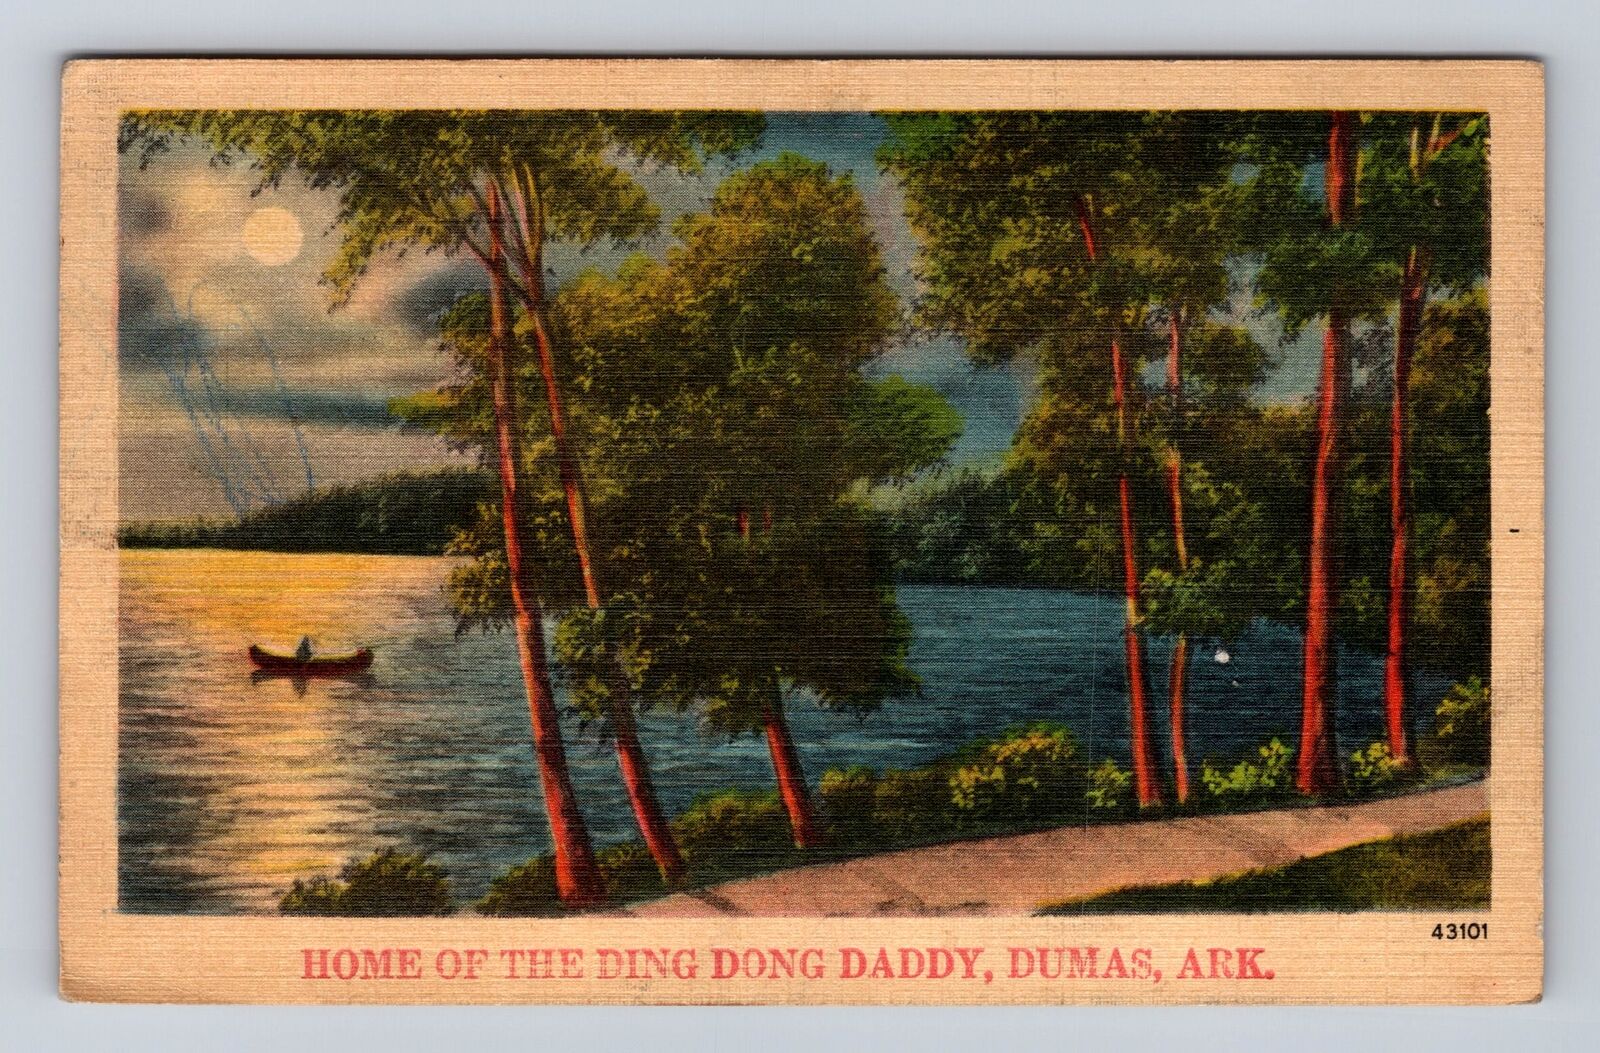 Dumas AK-Arkansas, Home Of The Ding Dong Daddy Song, Vintage c1947 Postcard